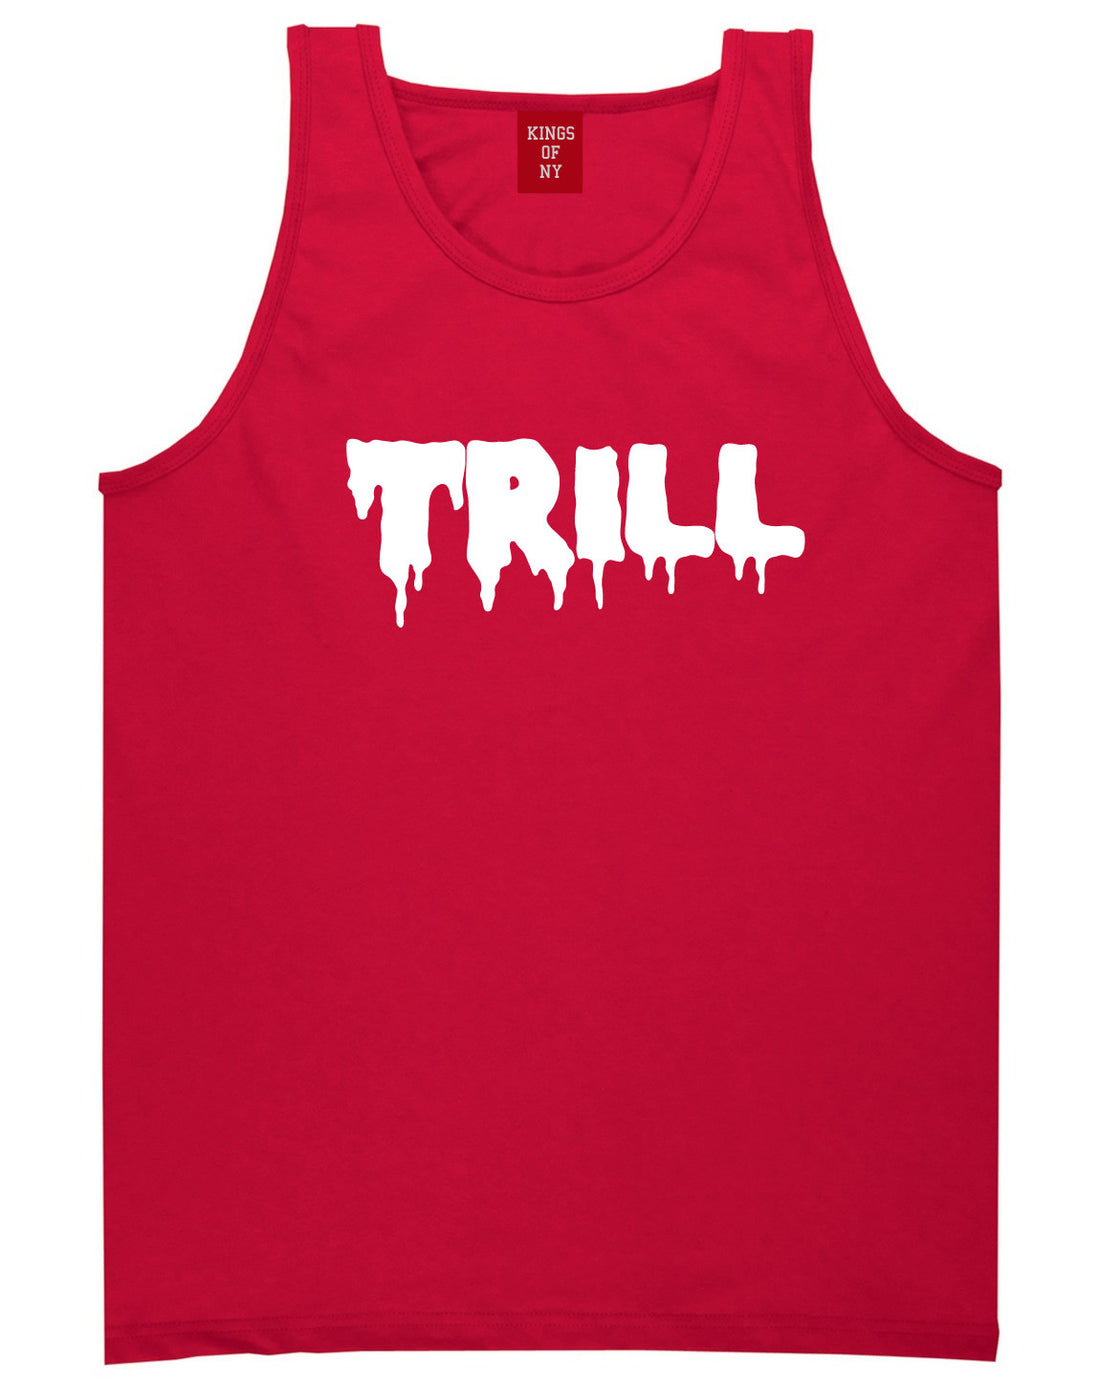 Trill Blood New York Bx Been Style Fashion Tank Top In Red by Kings Of NY